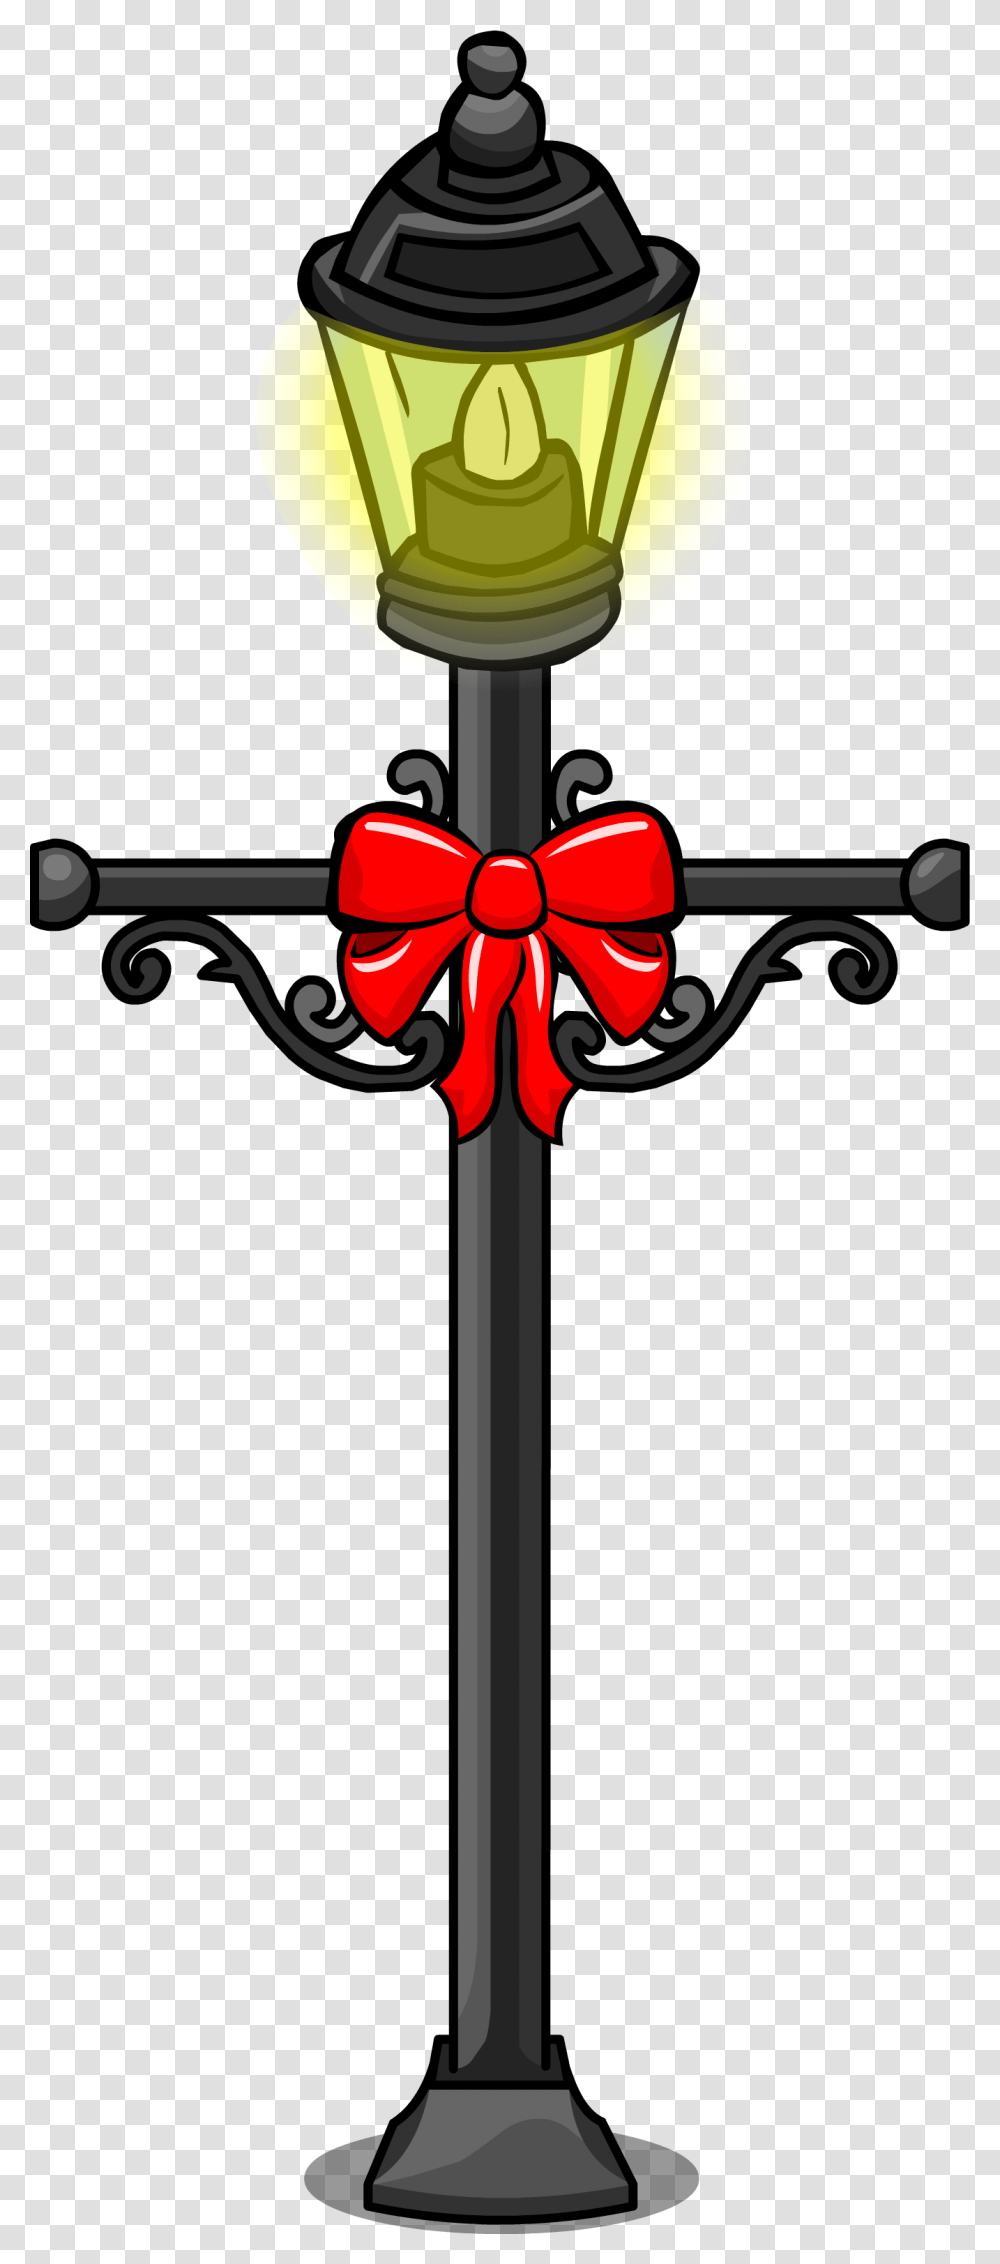 Wrought Iron Lamp Post Sprite Light Post Sprite, Weapon, Weaponry, Emblem Transparent Png